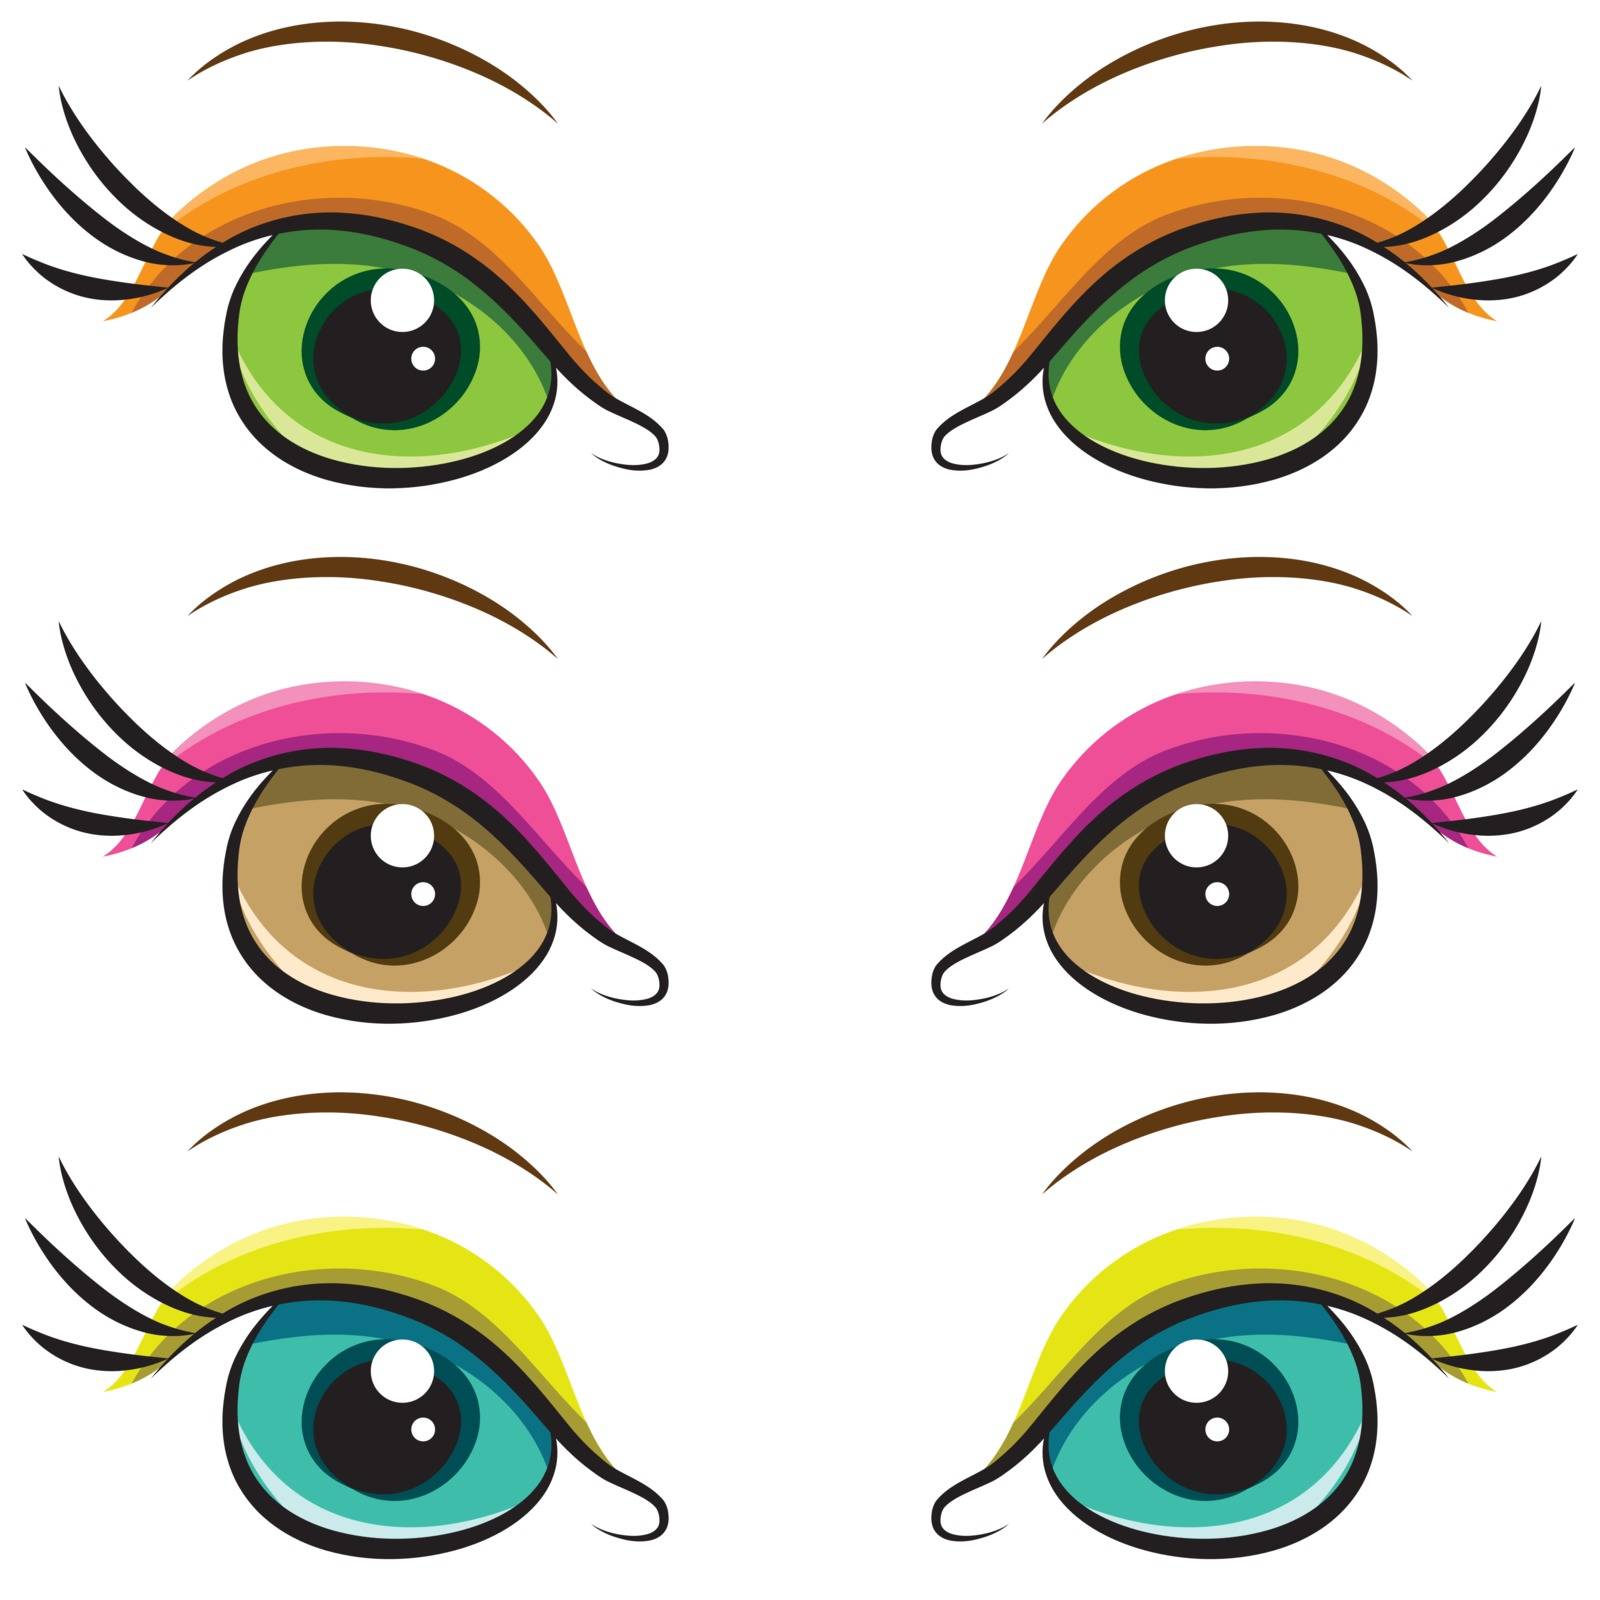 Set of several pairs of eyes. vector